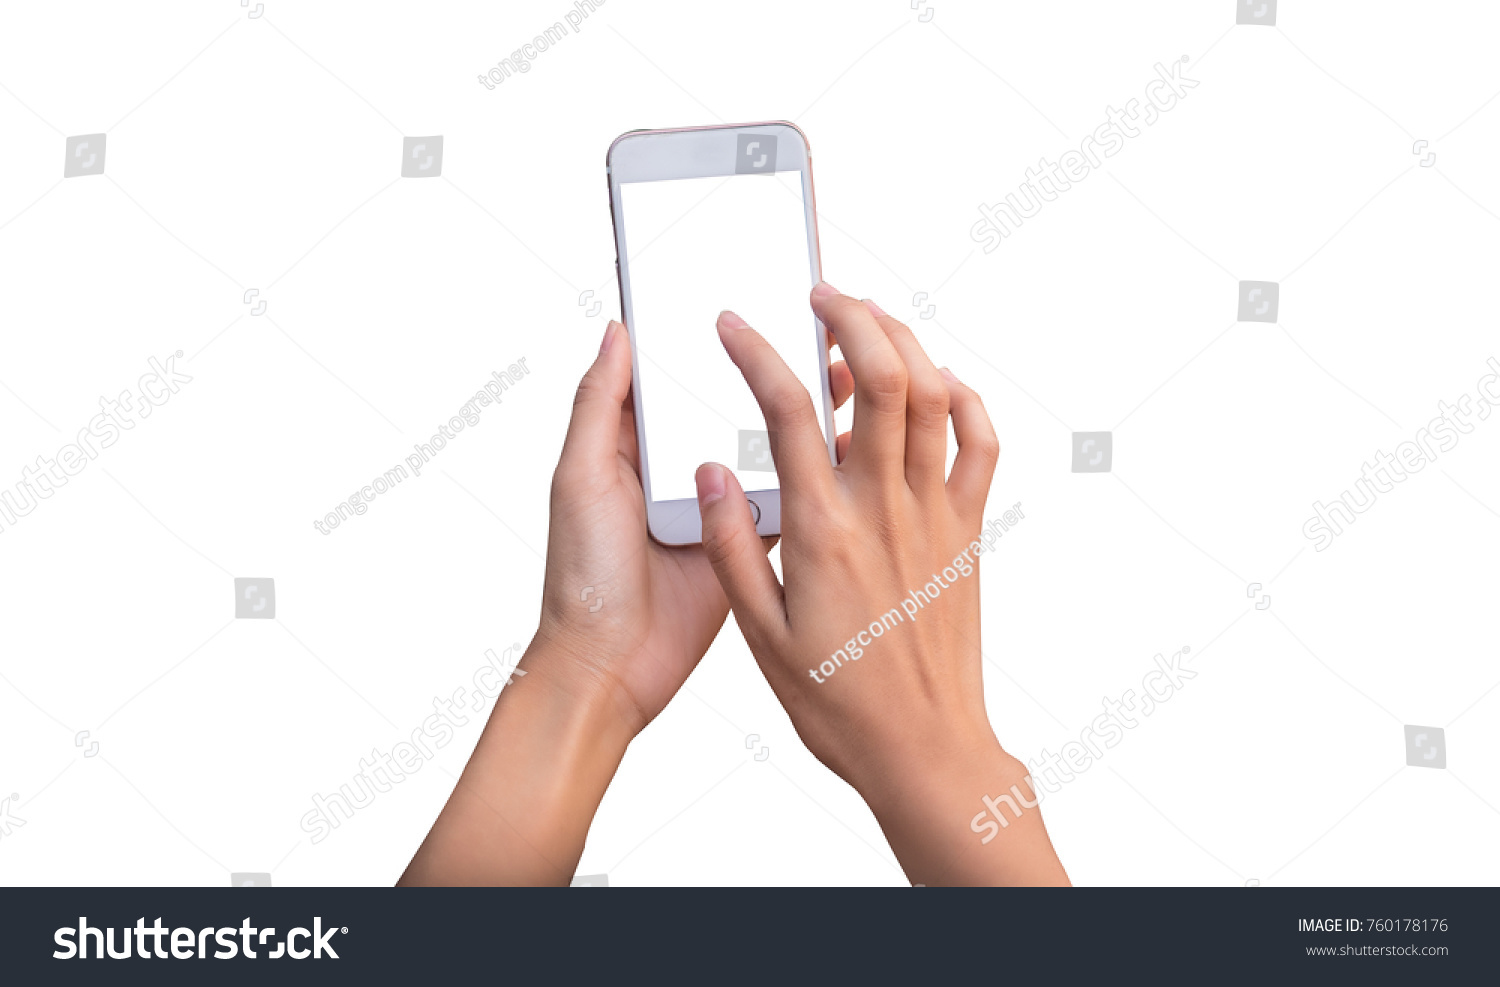 hand holding phone mobile and touching screen isolated on white background #760178176